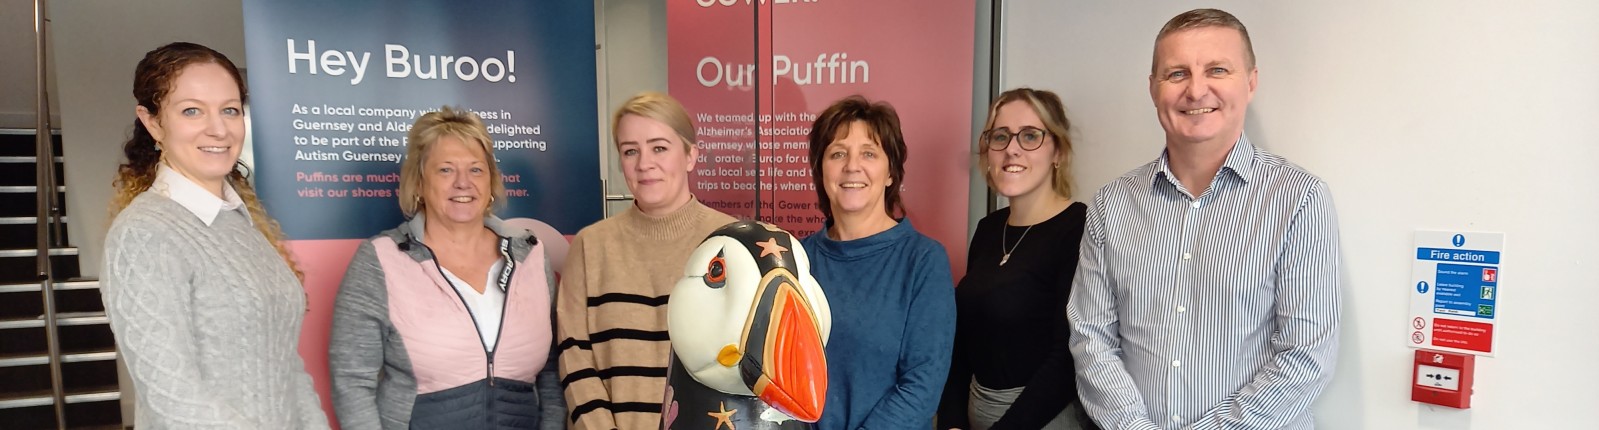 Meet Buroo, Gower's very own Puffin!